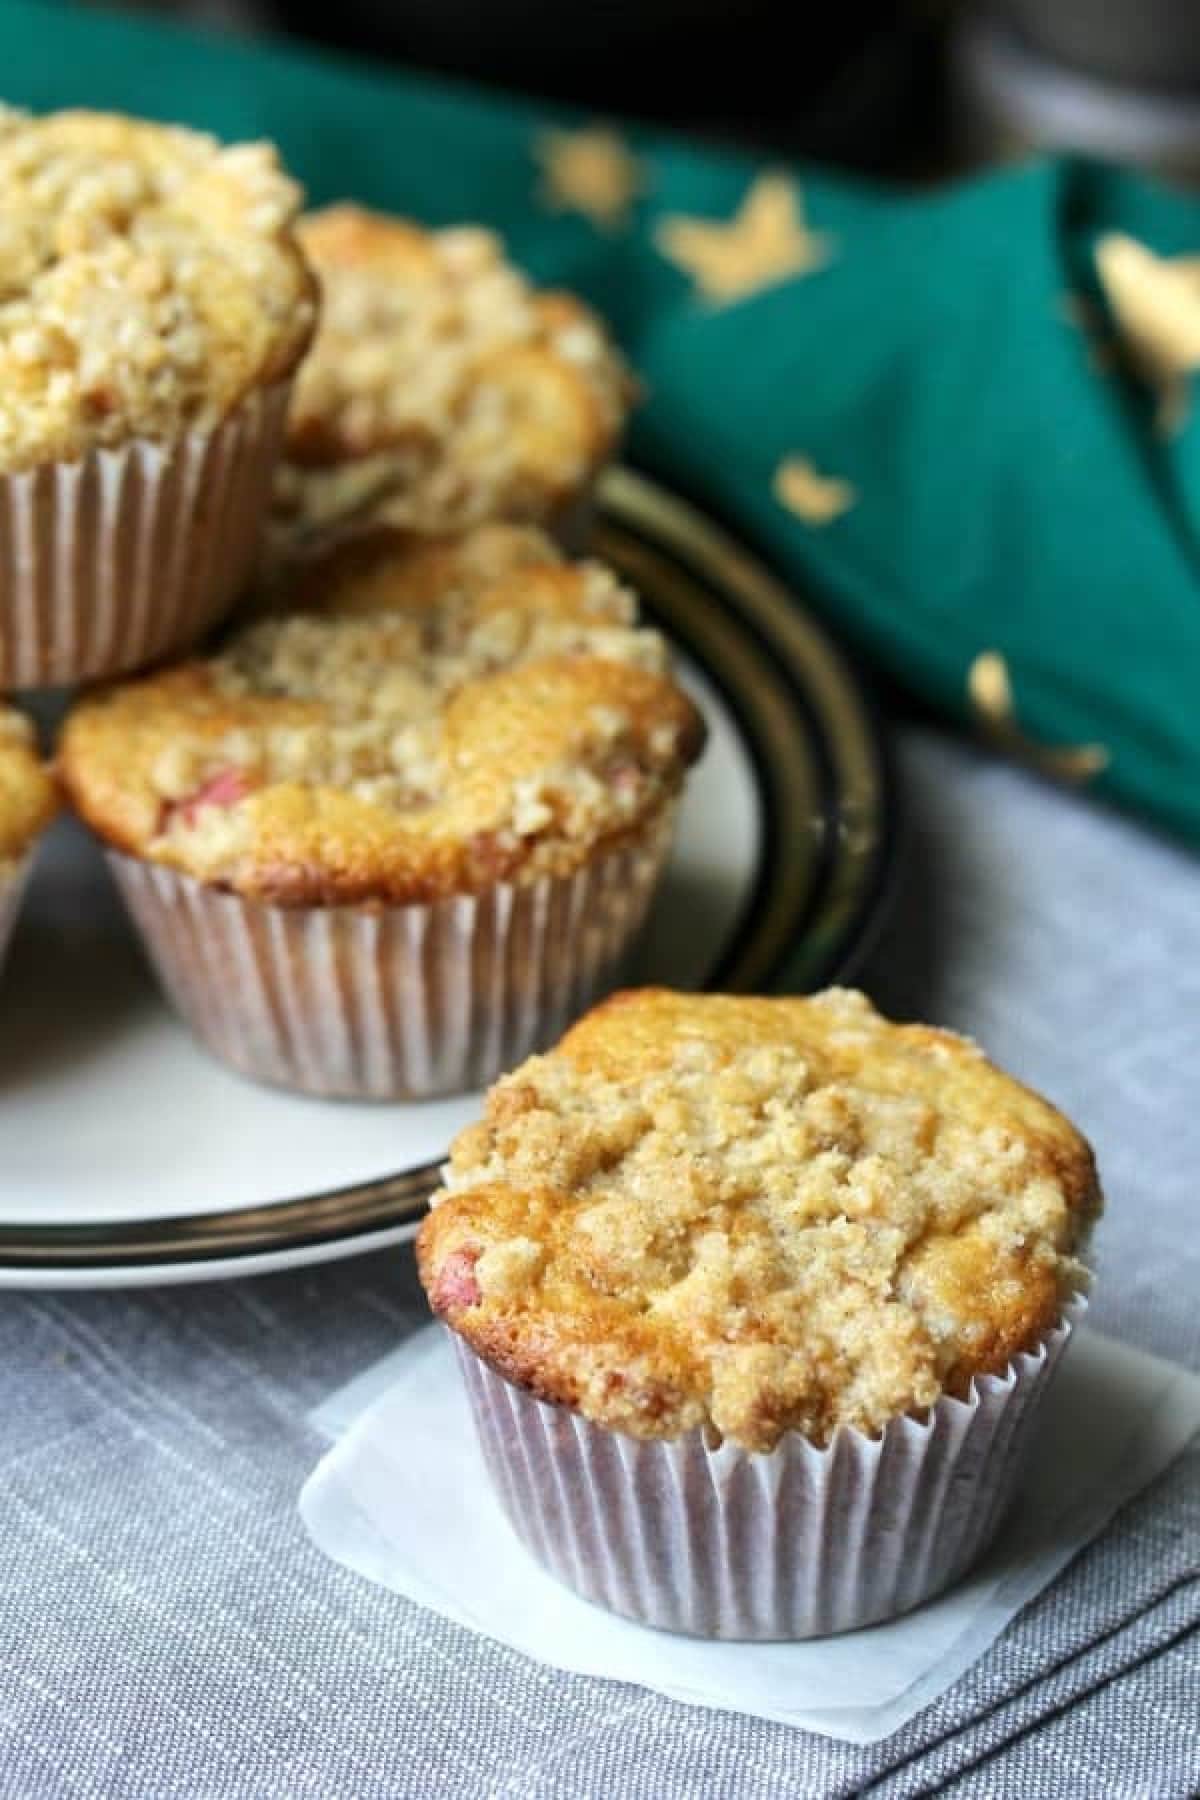 Rhubarb Muffins served on a plate.